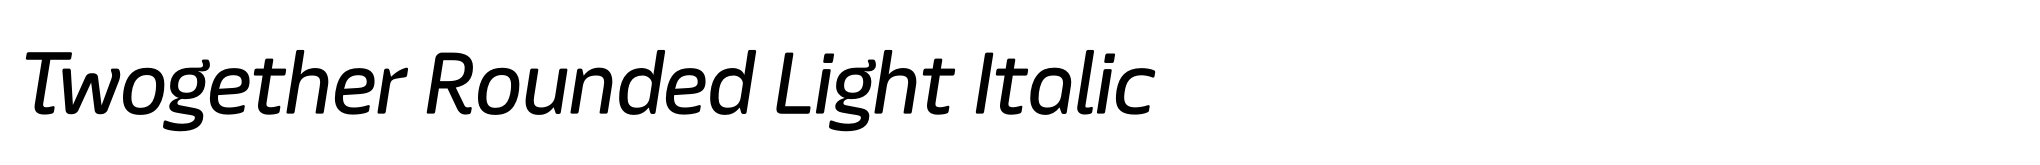 Twogether Rounded Light Italic image